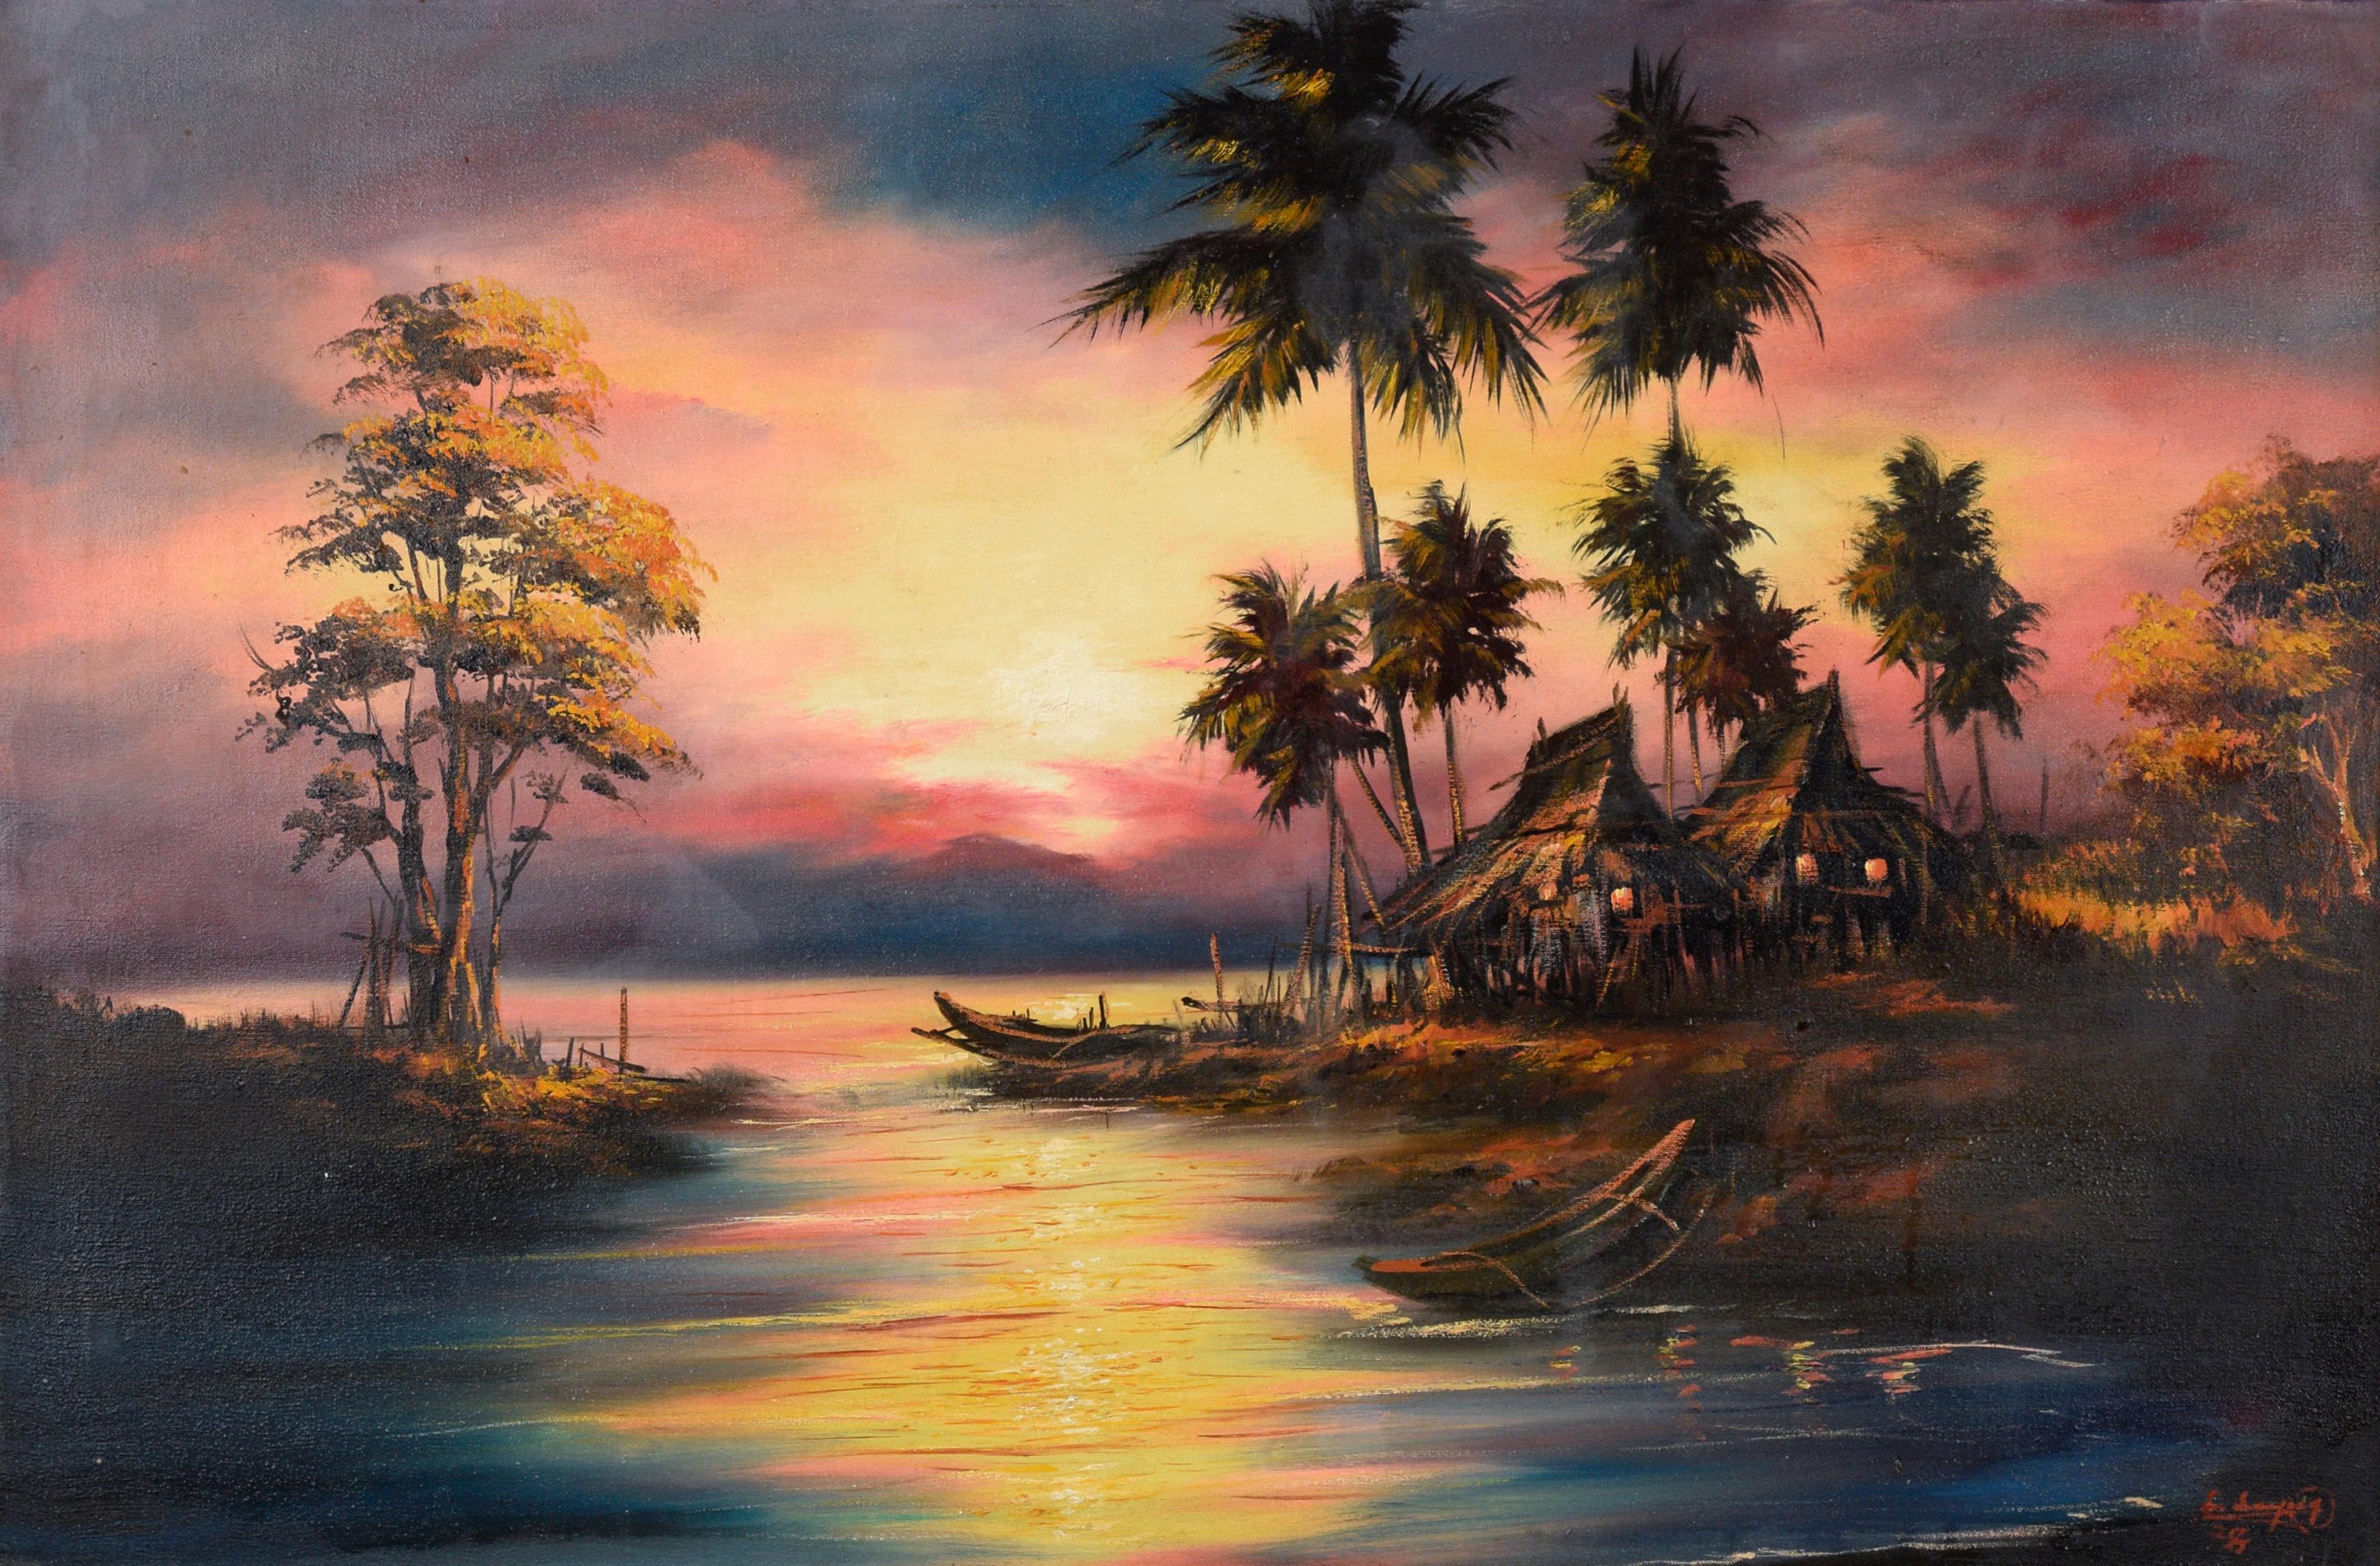 Filipino Fishing Village at Sunset - Tropical Landscape in Oil on Canvas - Painting by Unknown